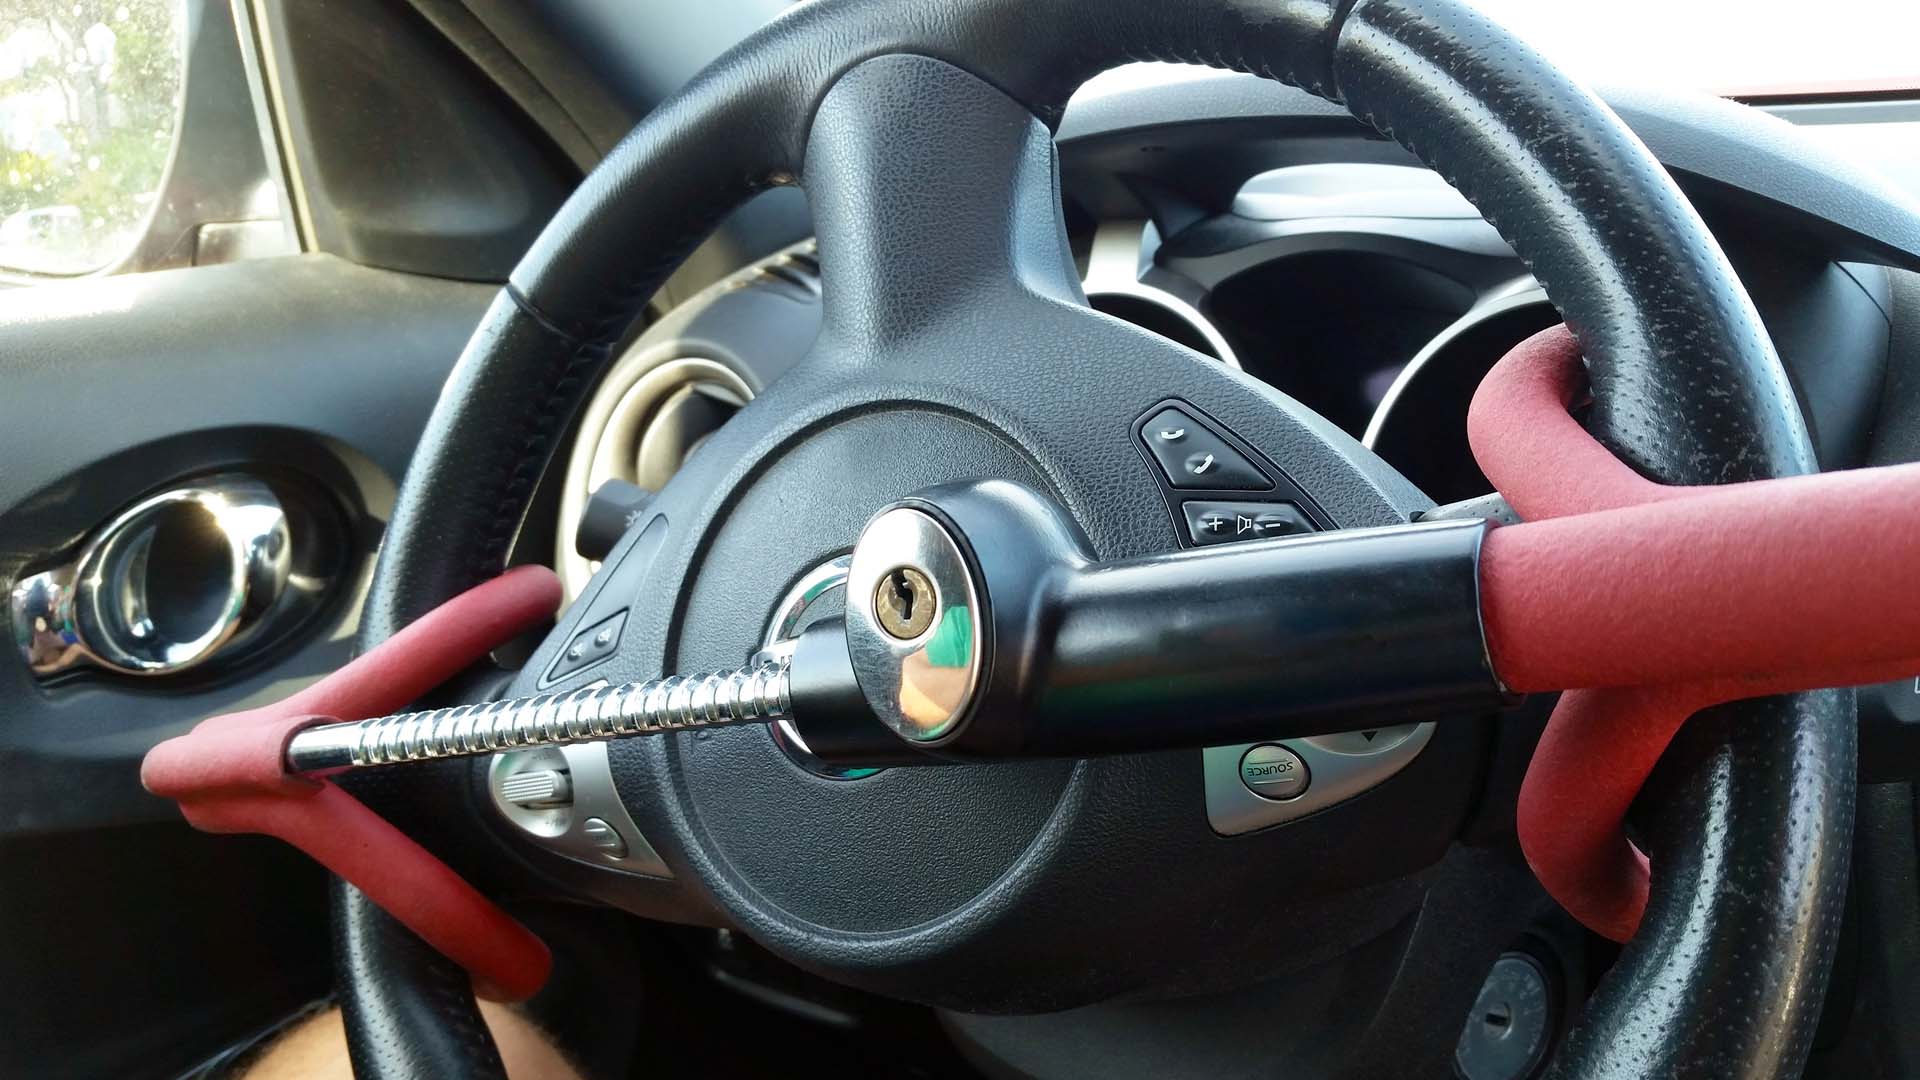 Locking Bar Anti Theft Protection with Tough-Steel Construction Universal Steering Wheel Lock Made of Hardened Steel 